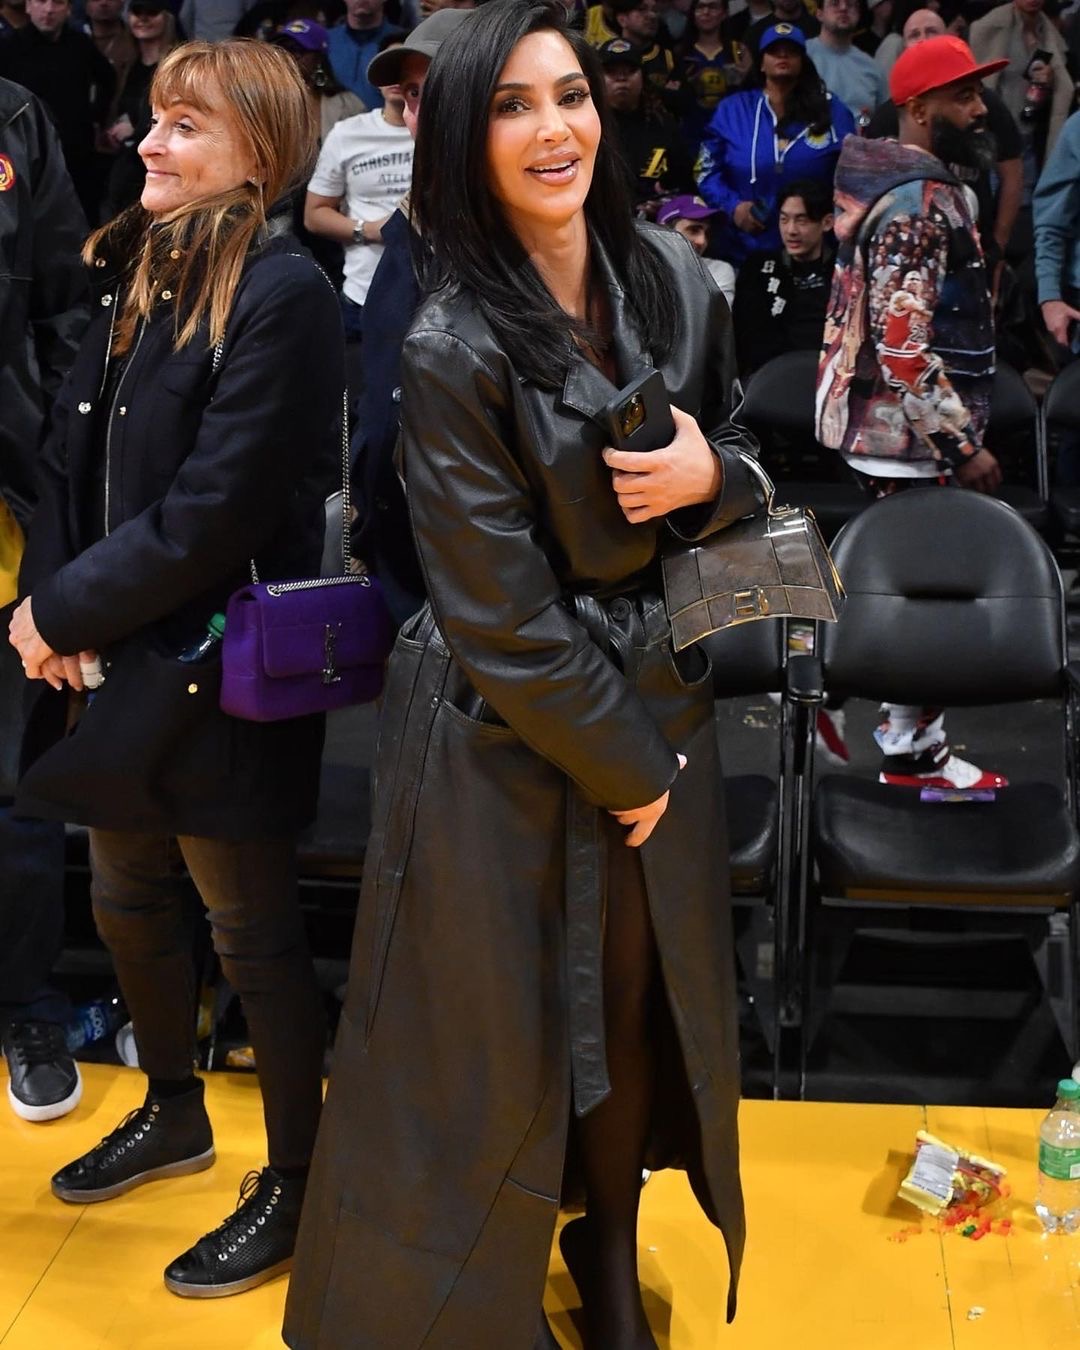 Kim Kardashian and Northwest Spotted Courtside in All Black Balenciaga Outfits 3